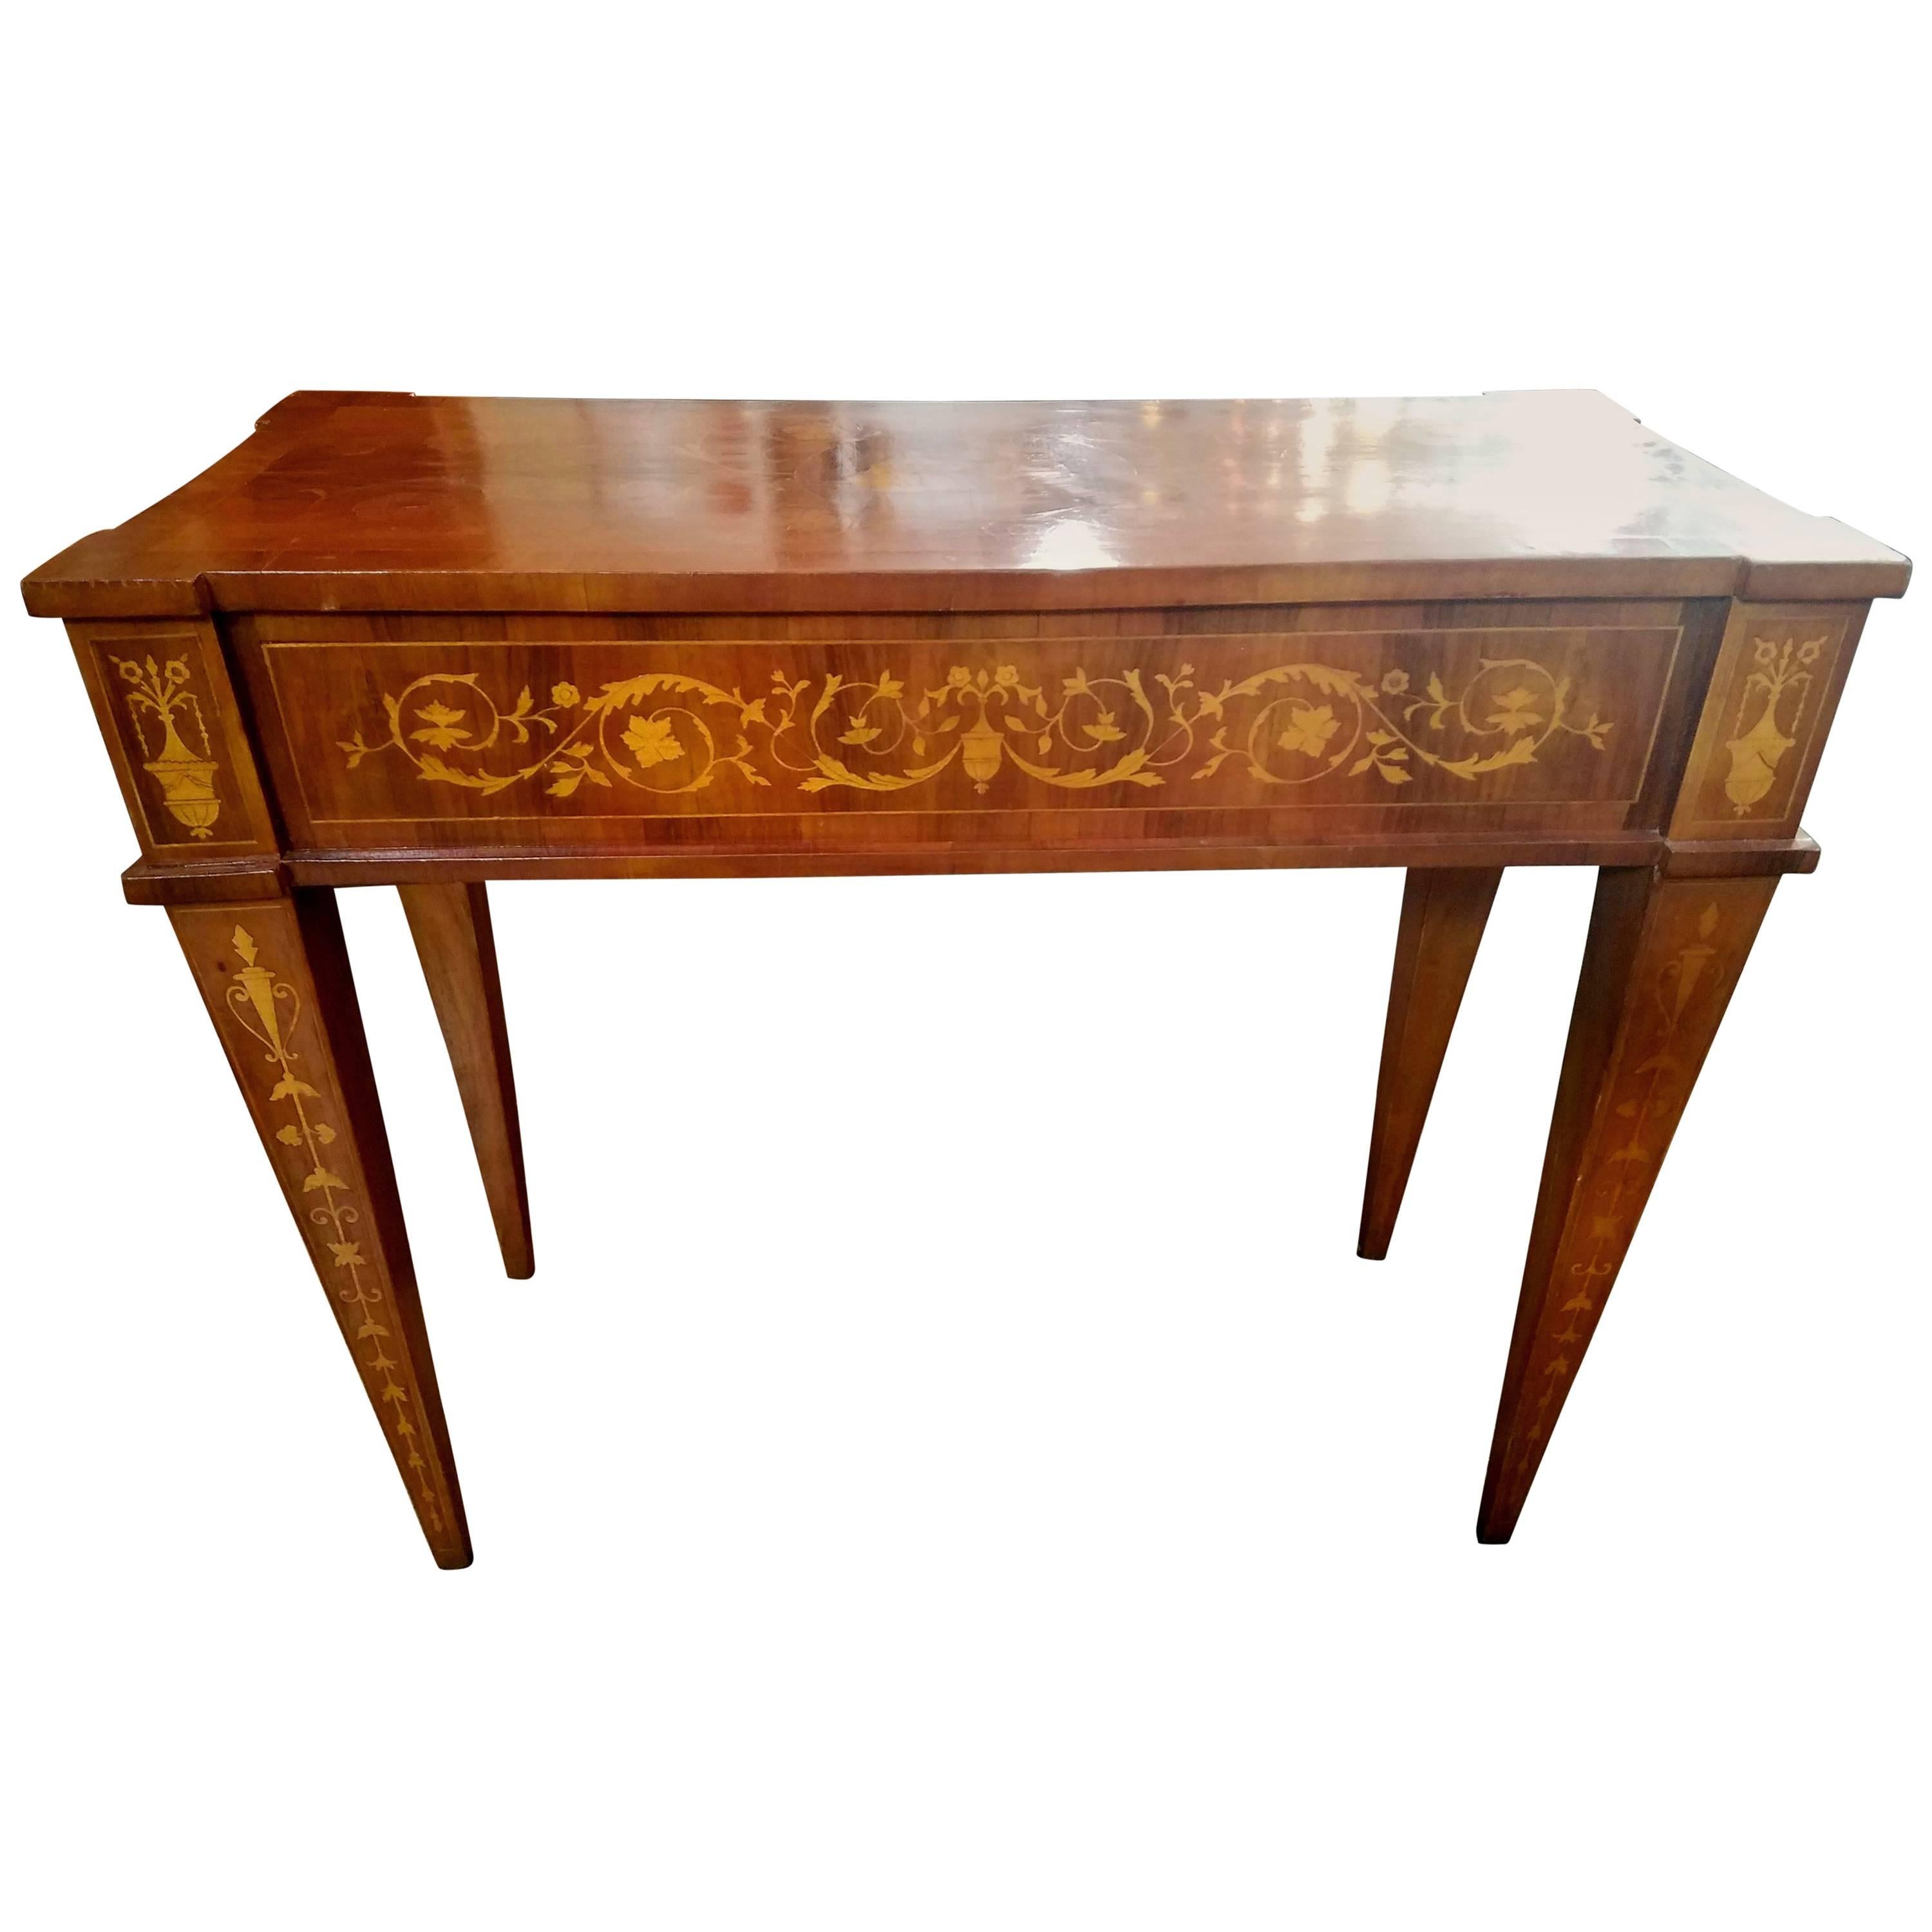 Marquetry Inlaid Entry Table in Neoclassical Style